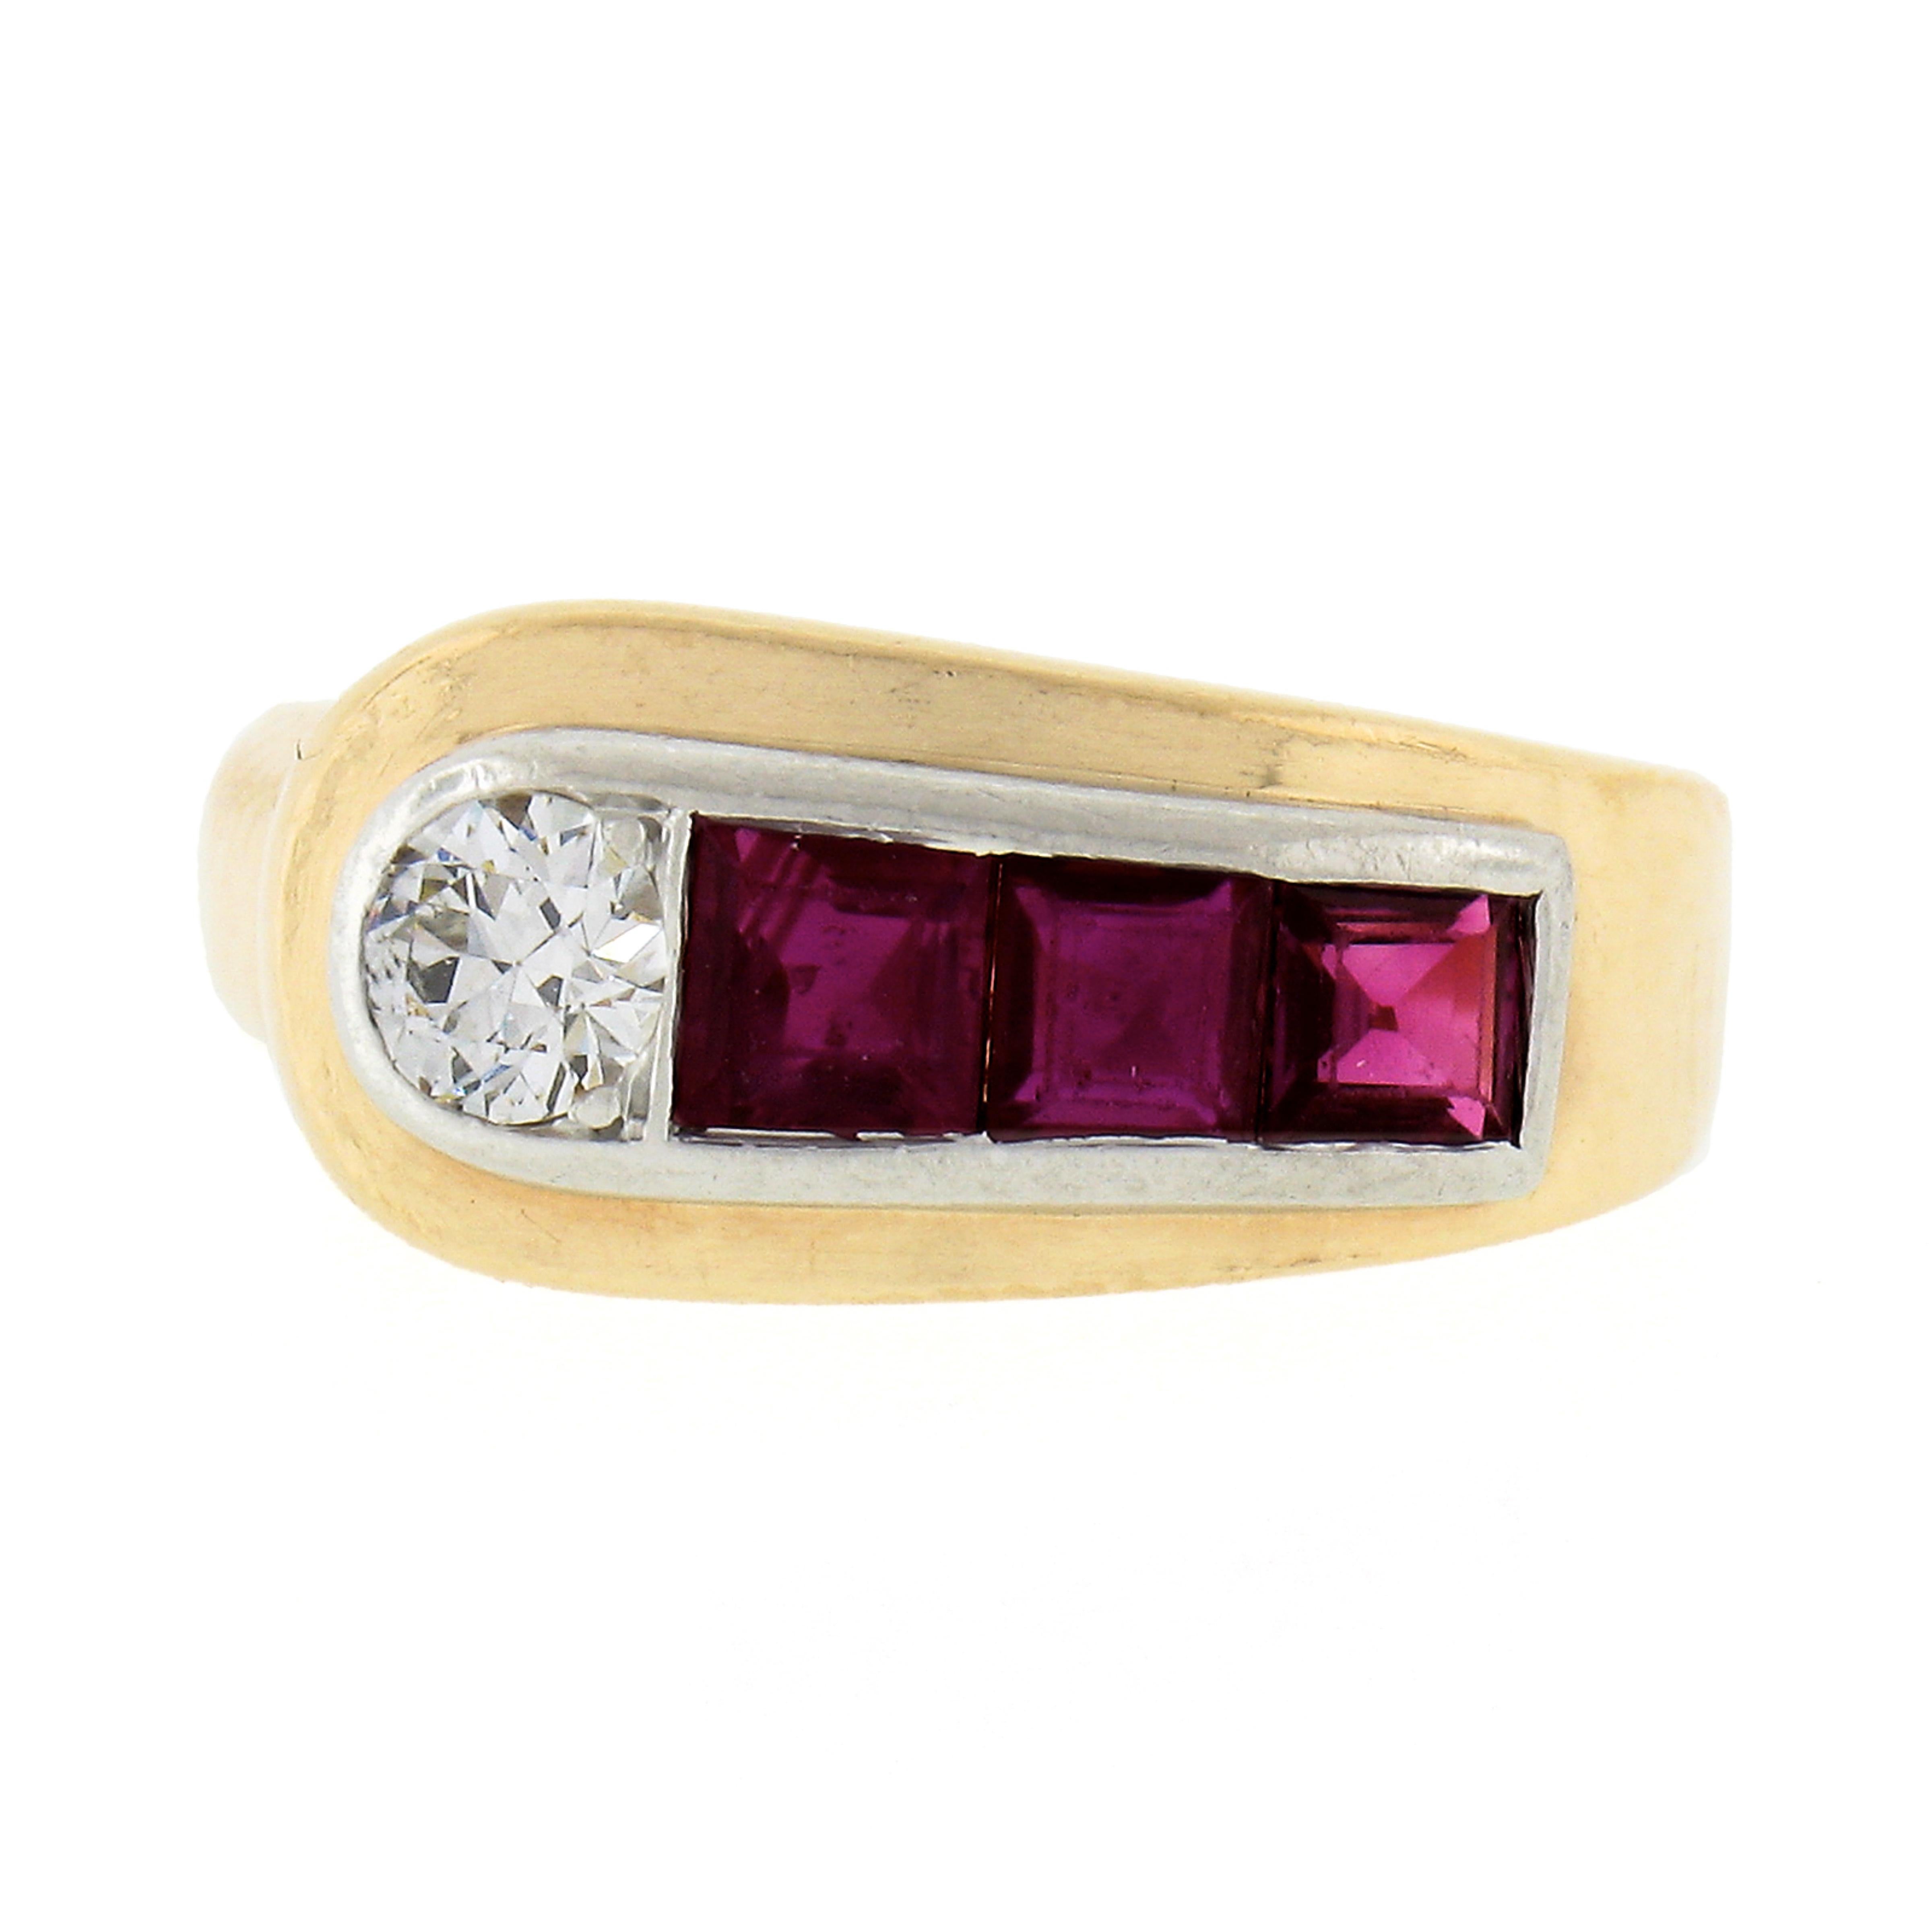 Women's or Men's Maurice Tishman Retro 14k Gold & Platinum Diamond & Ruby Buckle Style Band Ring For Sale